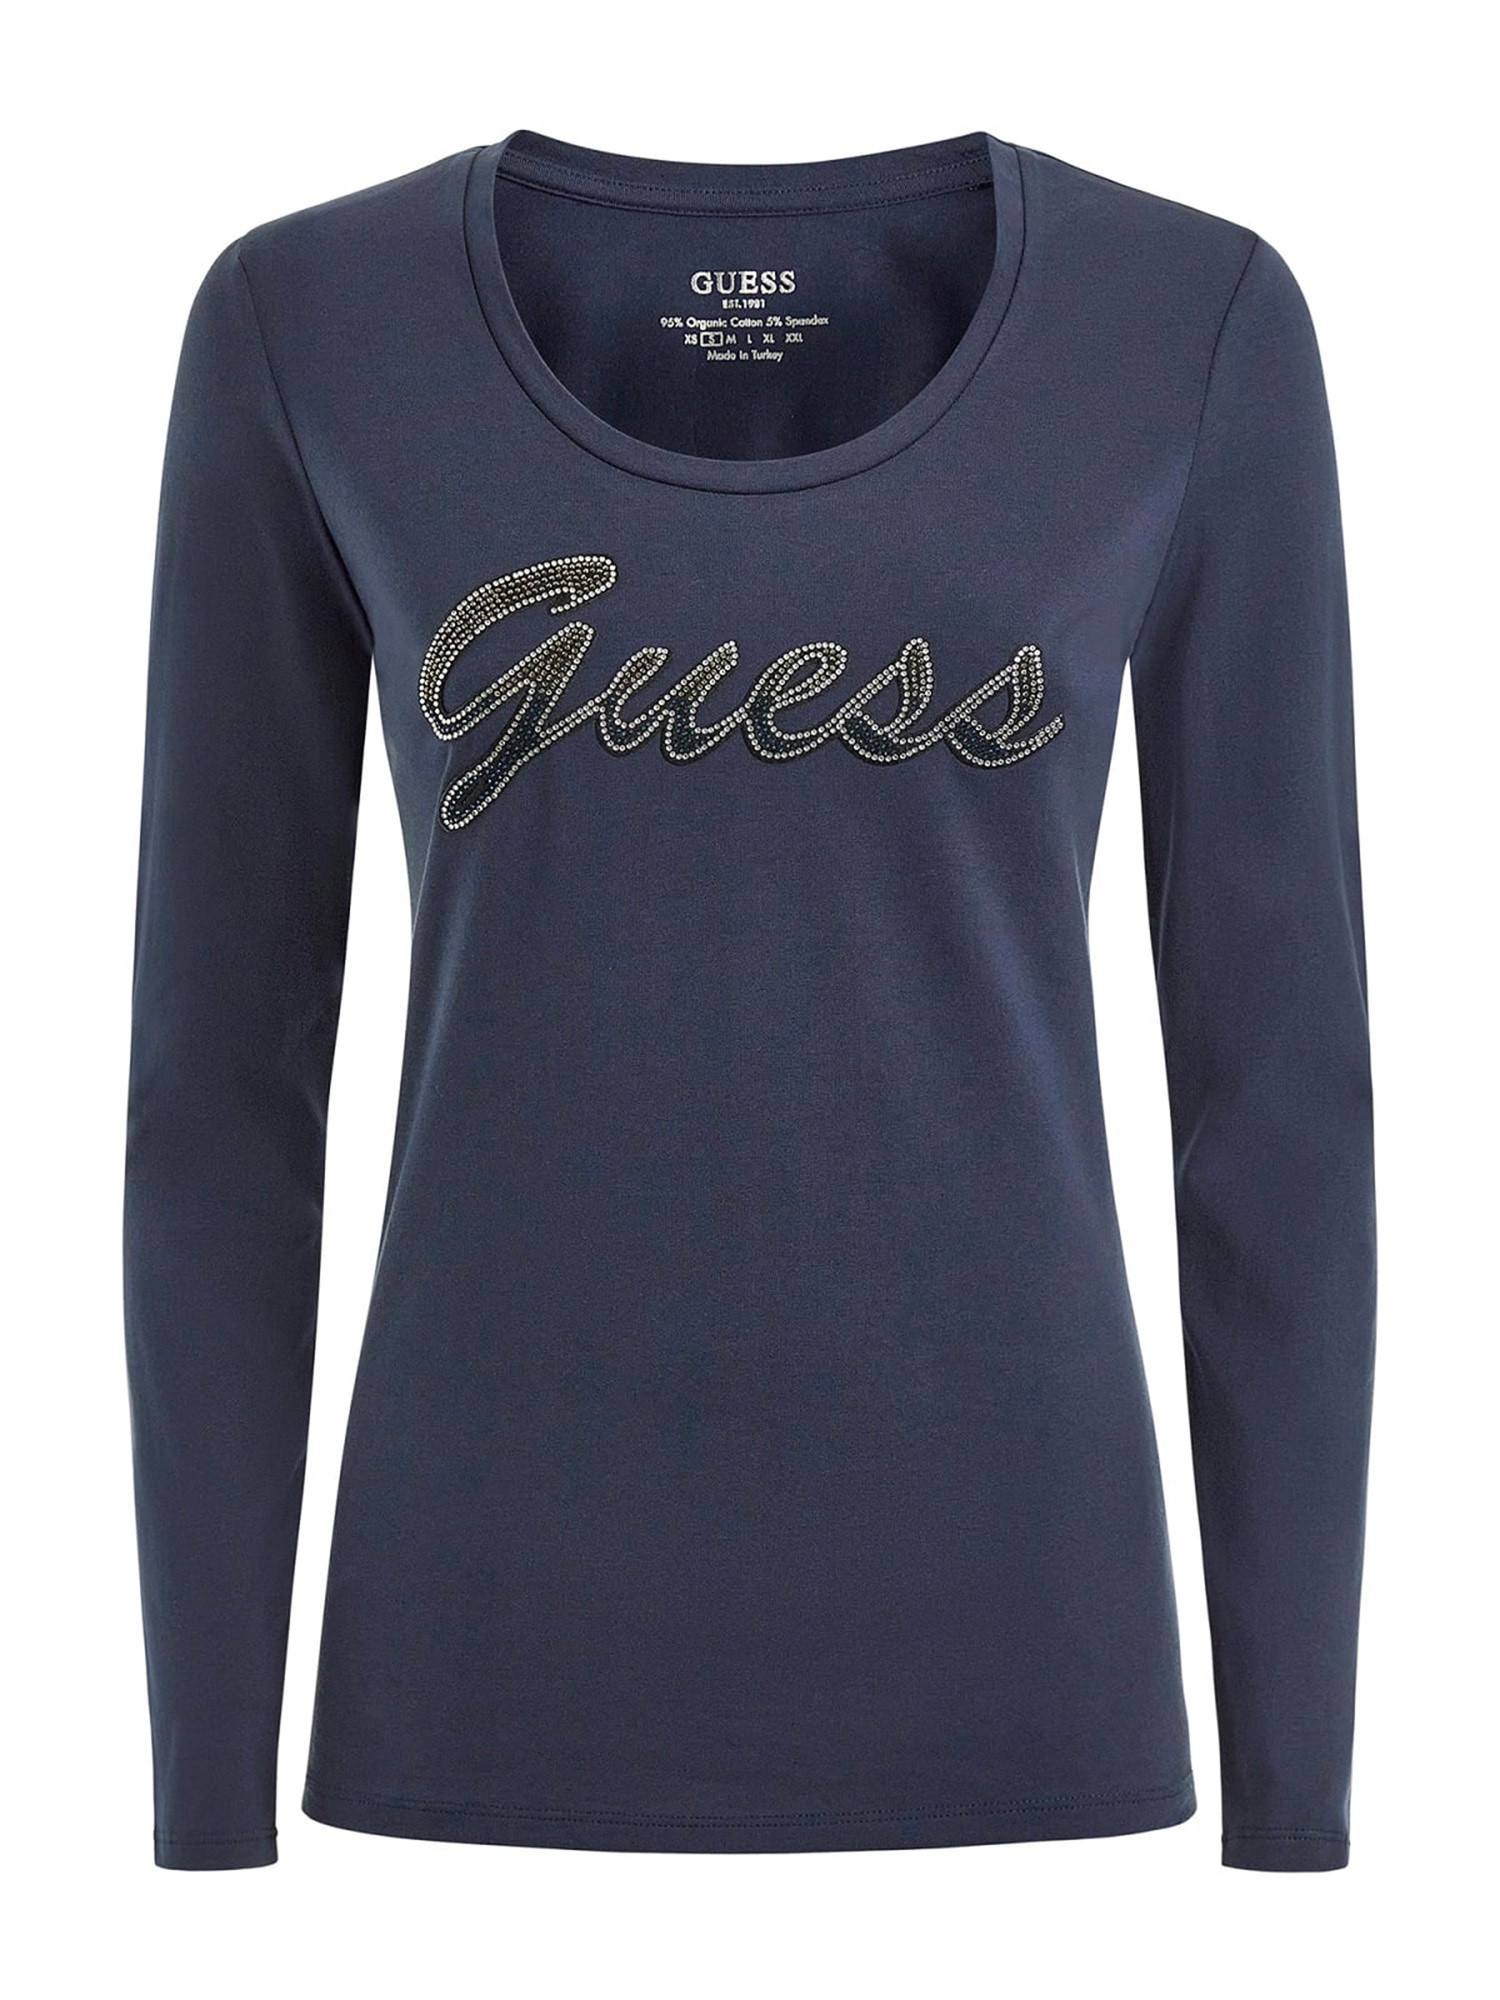 Guess - T-shirt con logo con strass slim fit, Blu scuro, large image number 0